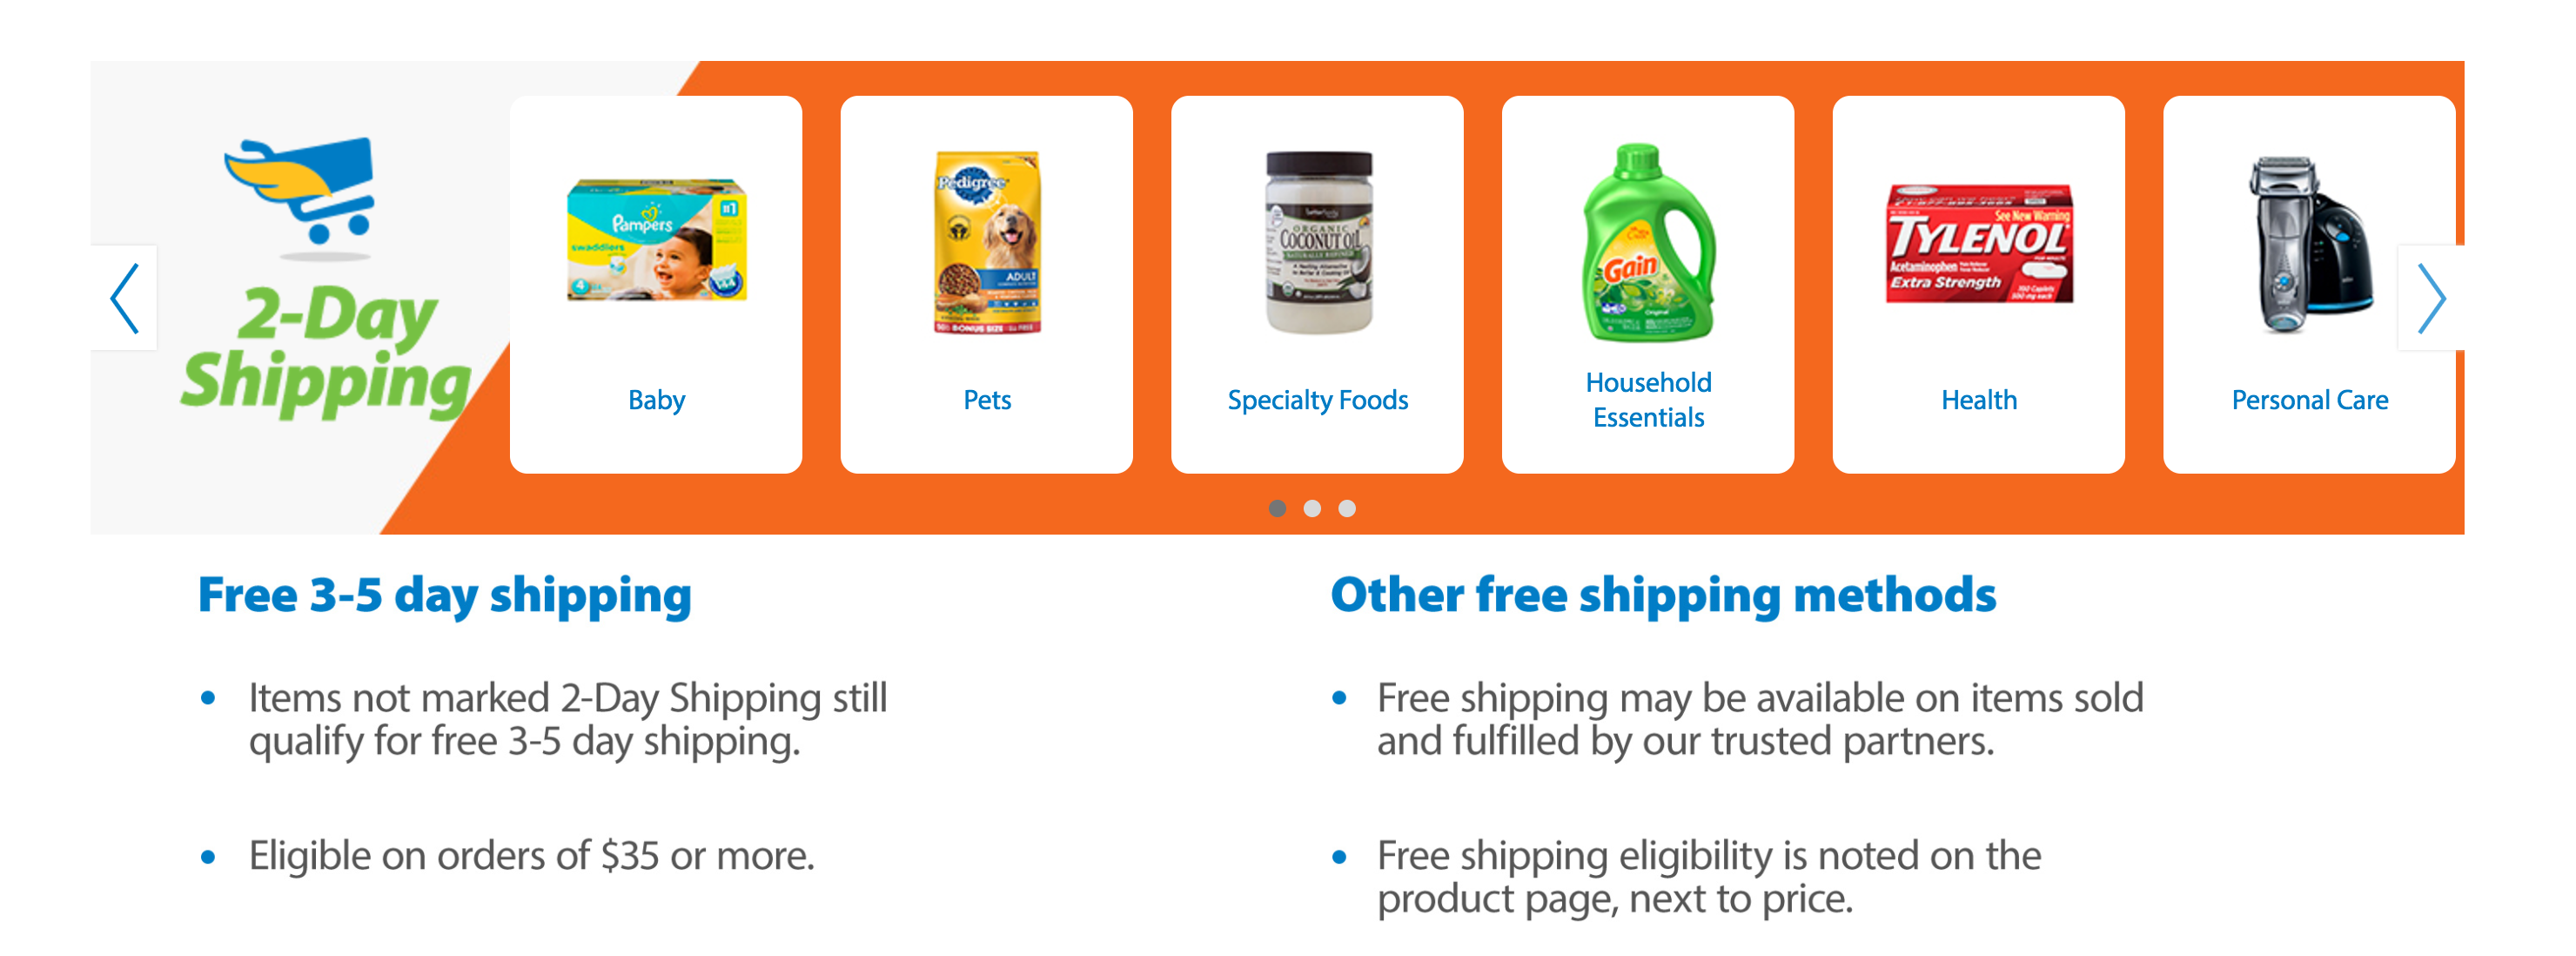 Walmart is now offering free 2day shipping on orders over 35 with no